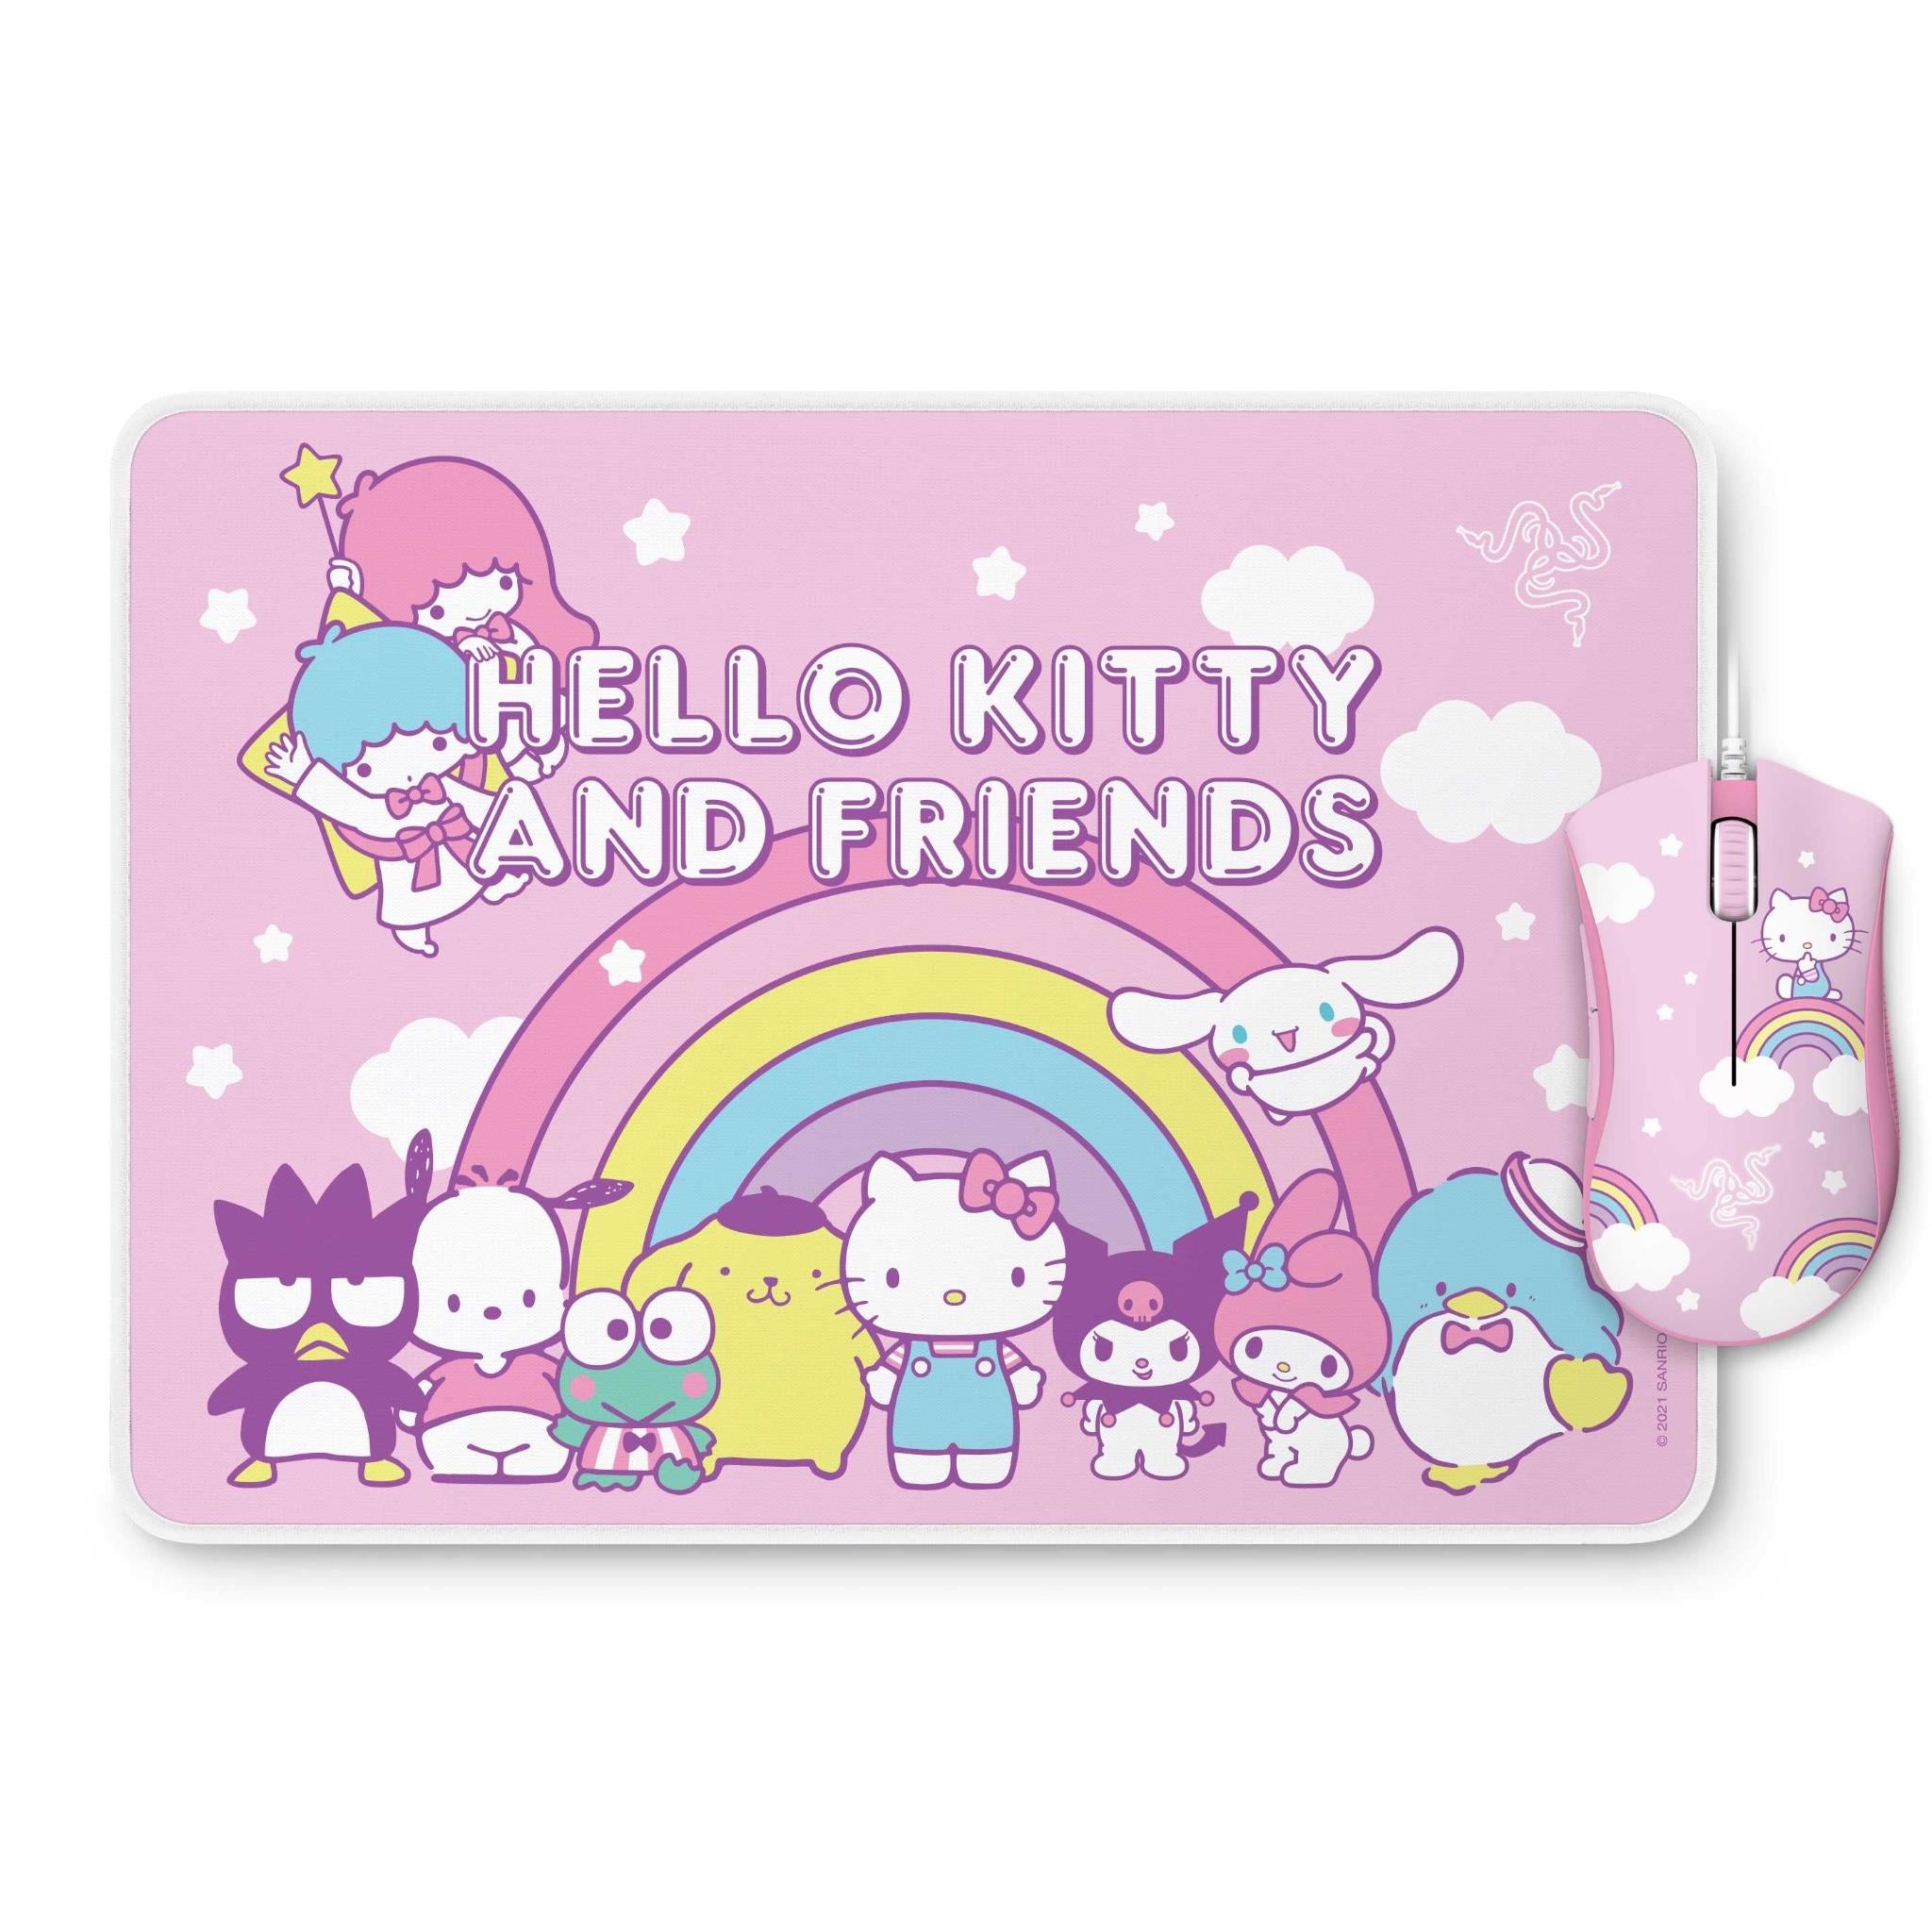 razer deathadder essential & goliathus mouse mat bundle hello kitty and friends edition